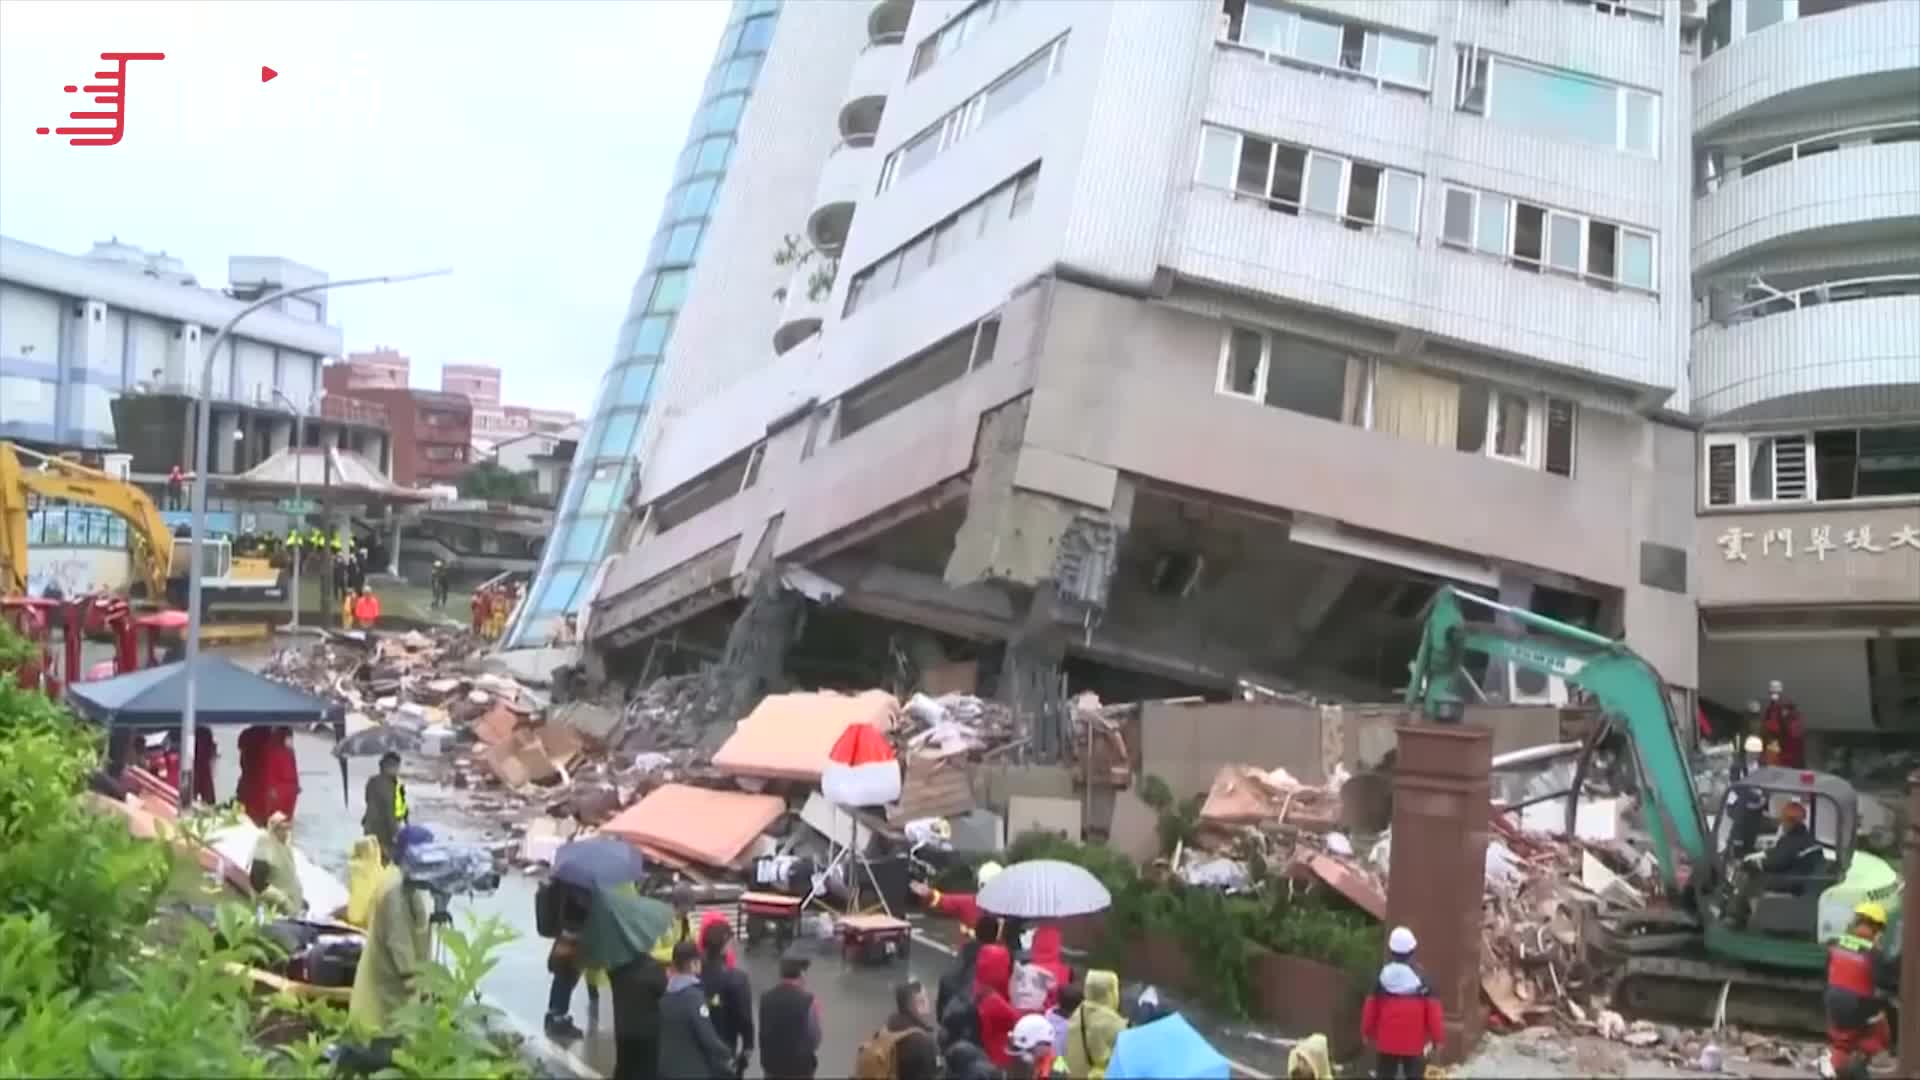 Taiwan Earthquake Toll Rises to 9 Dead, With Dozens Missing - The New ...